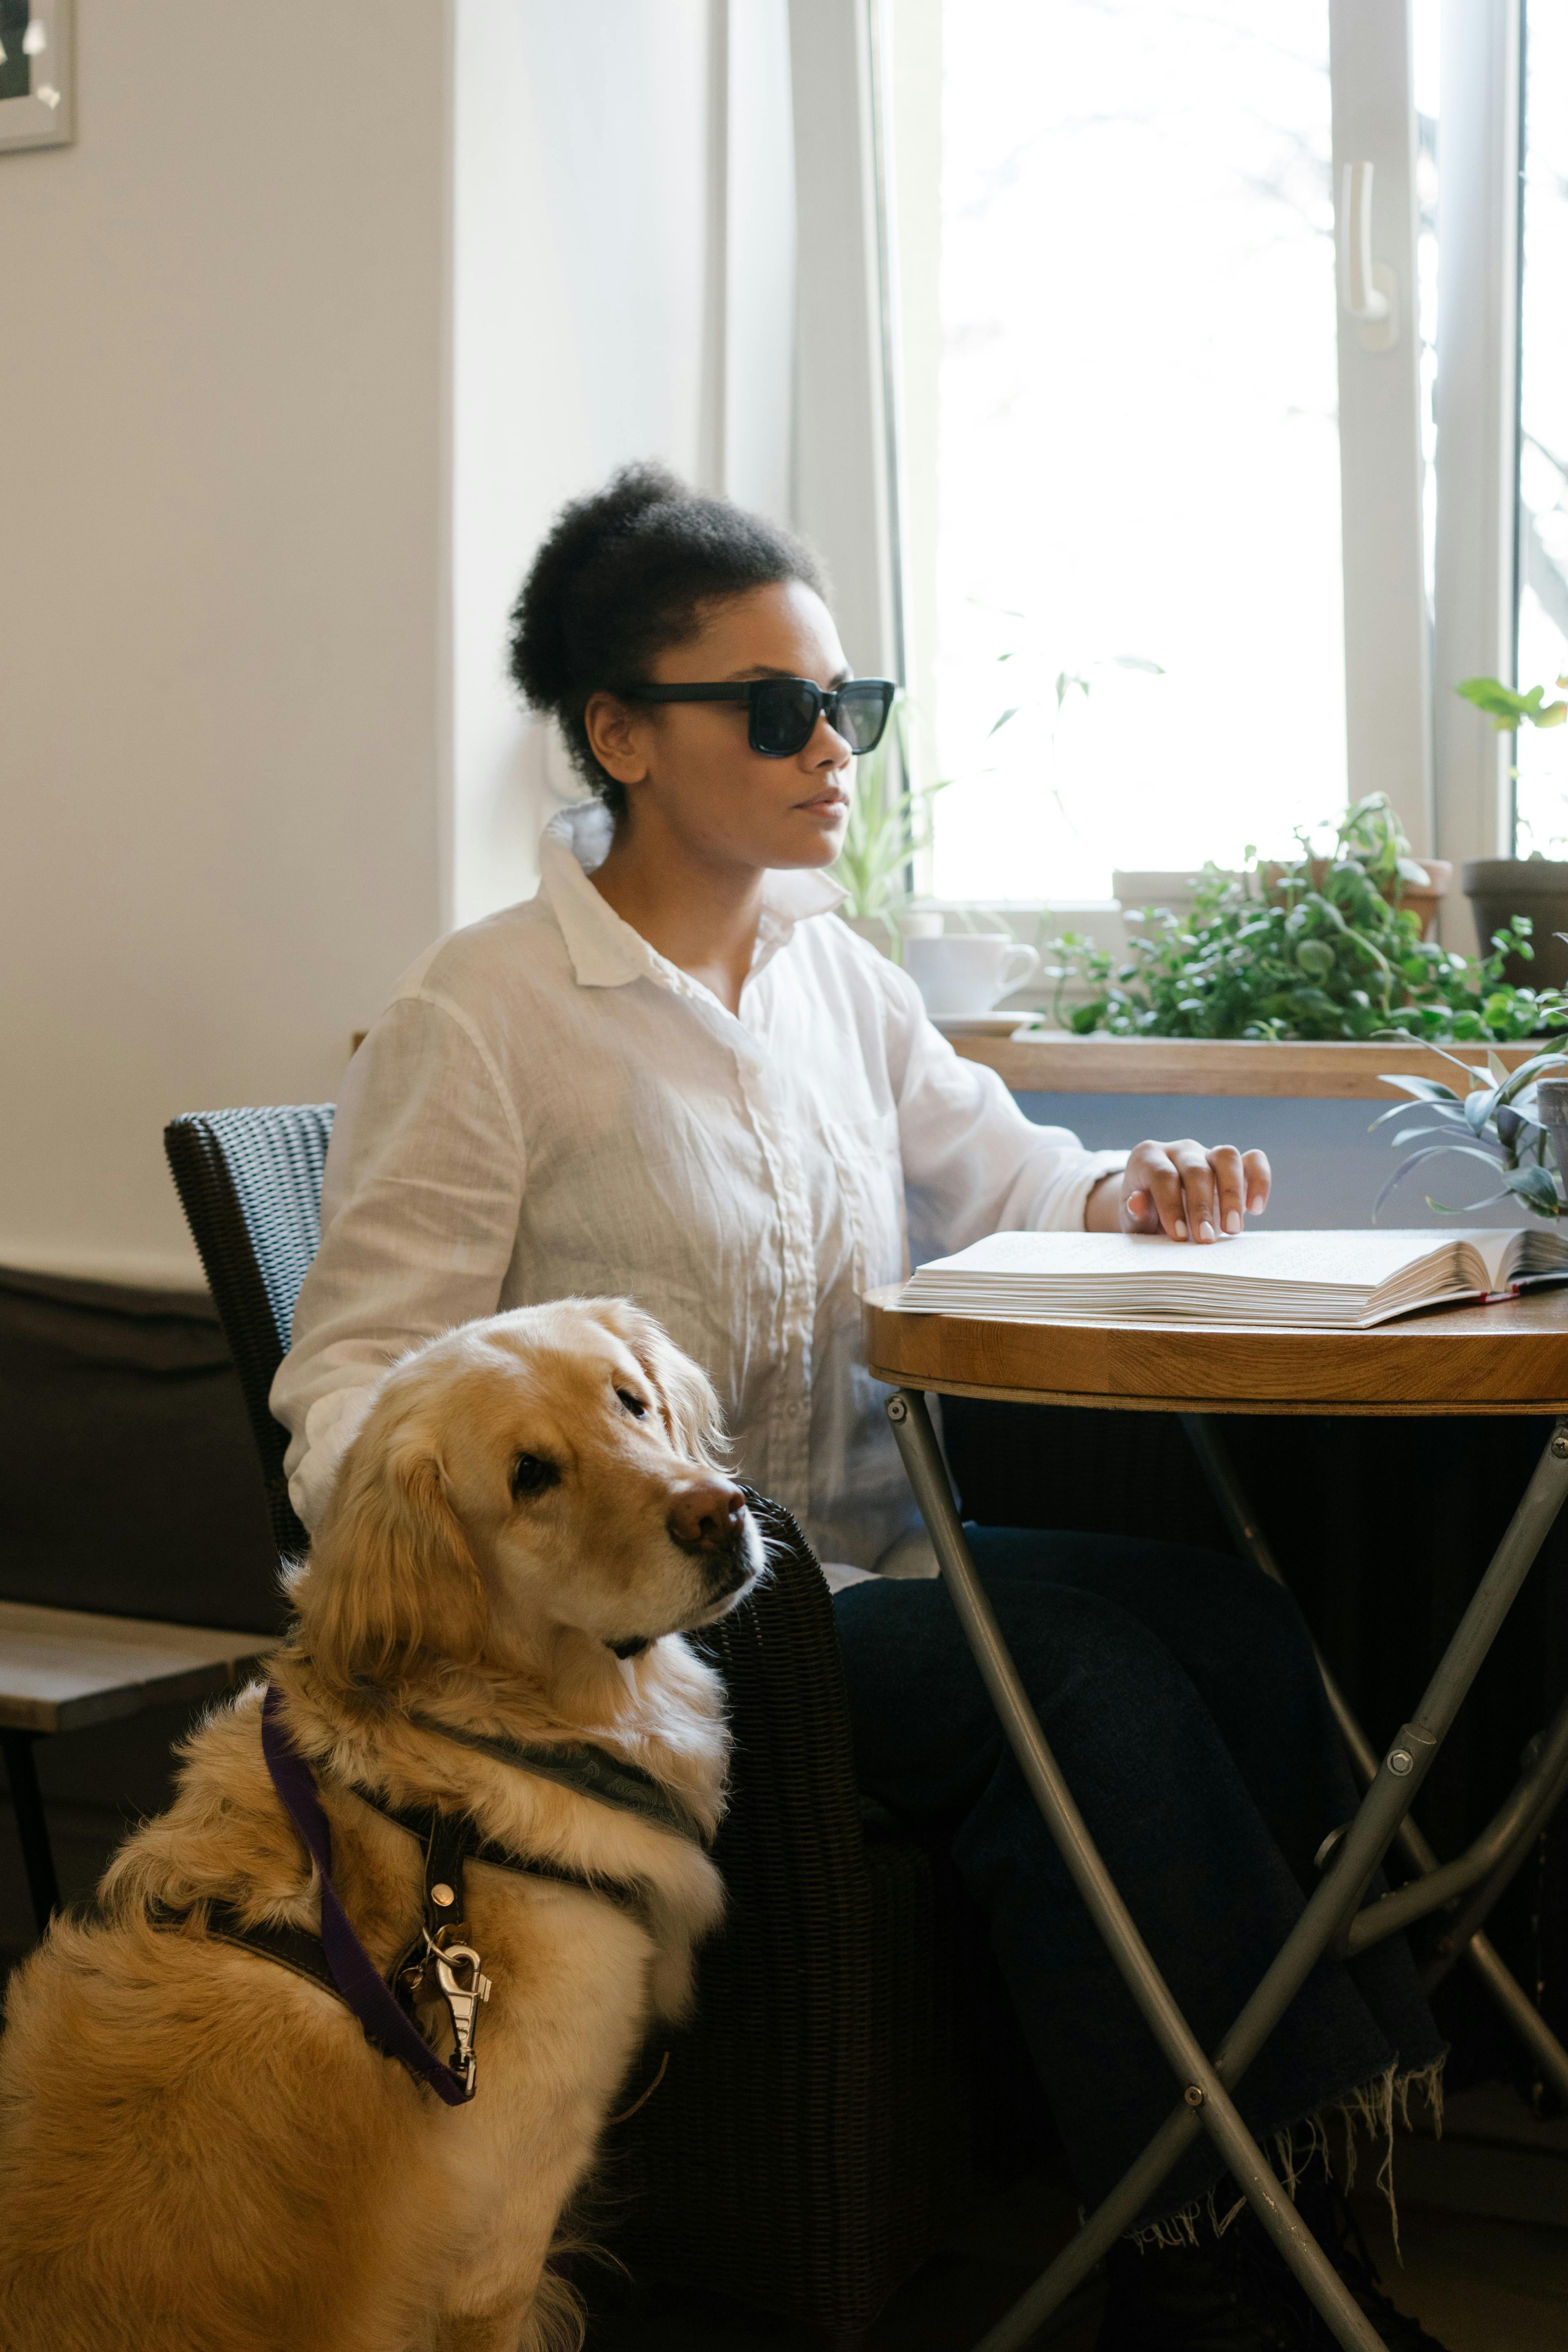 A blind woman reading braille in a café | Source: Pexels